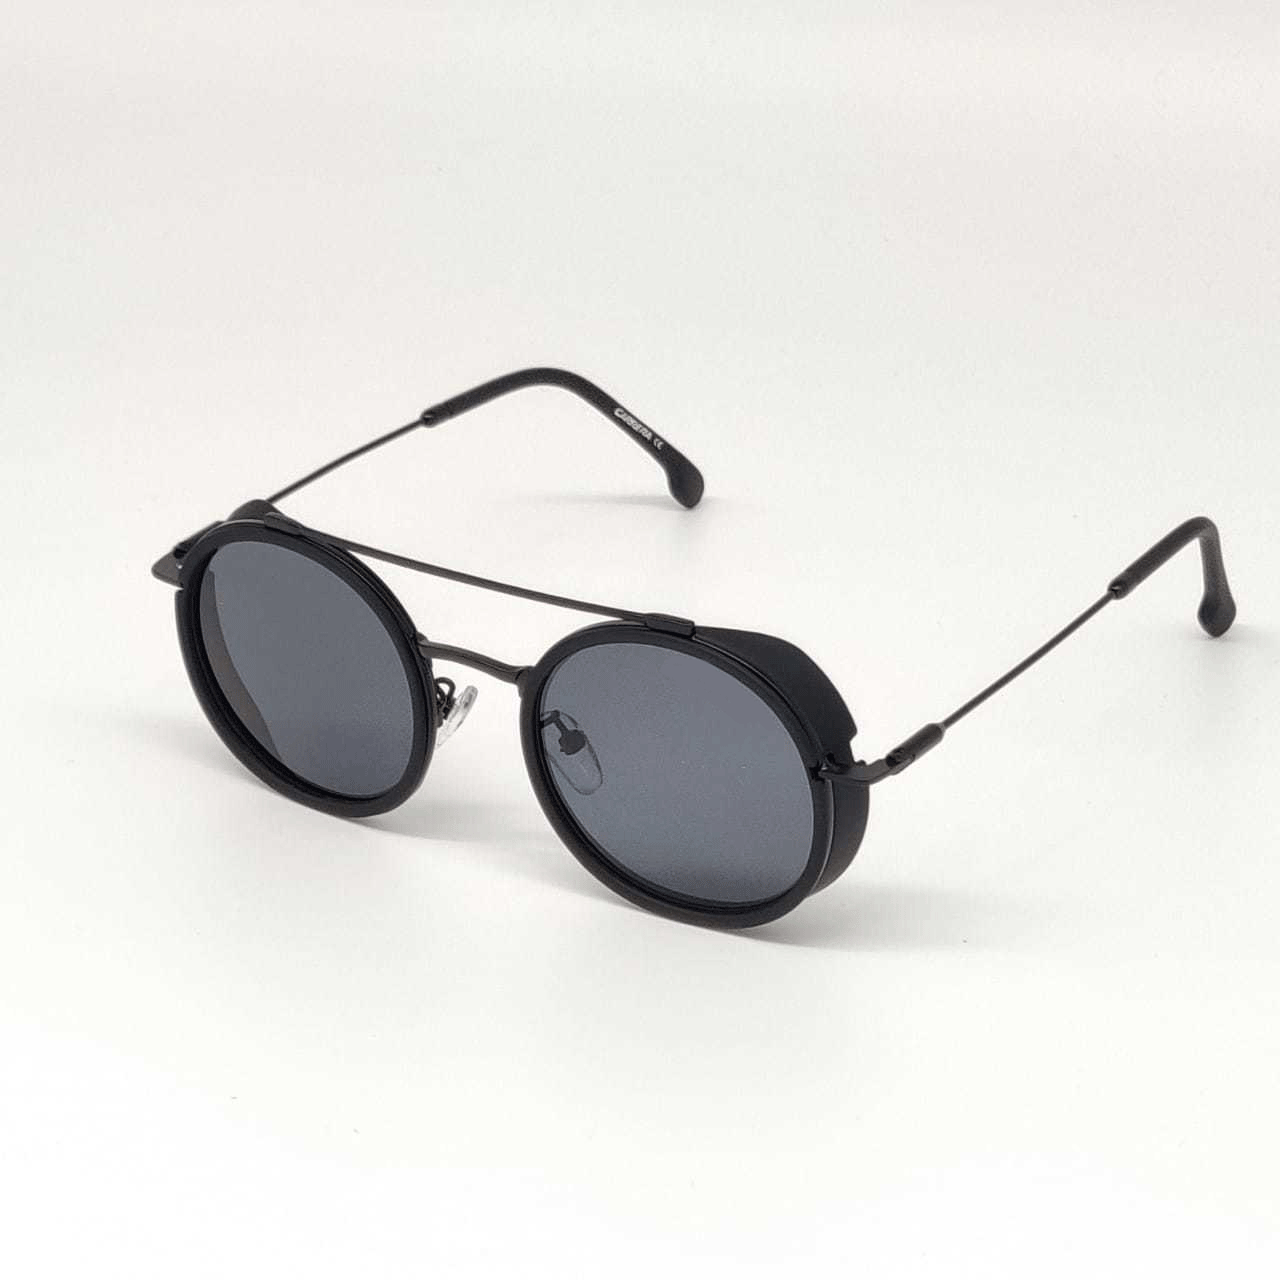 Ranveer Singh Stylish Round Sunglasses For Men And Women- Unique and Classy